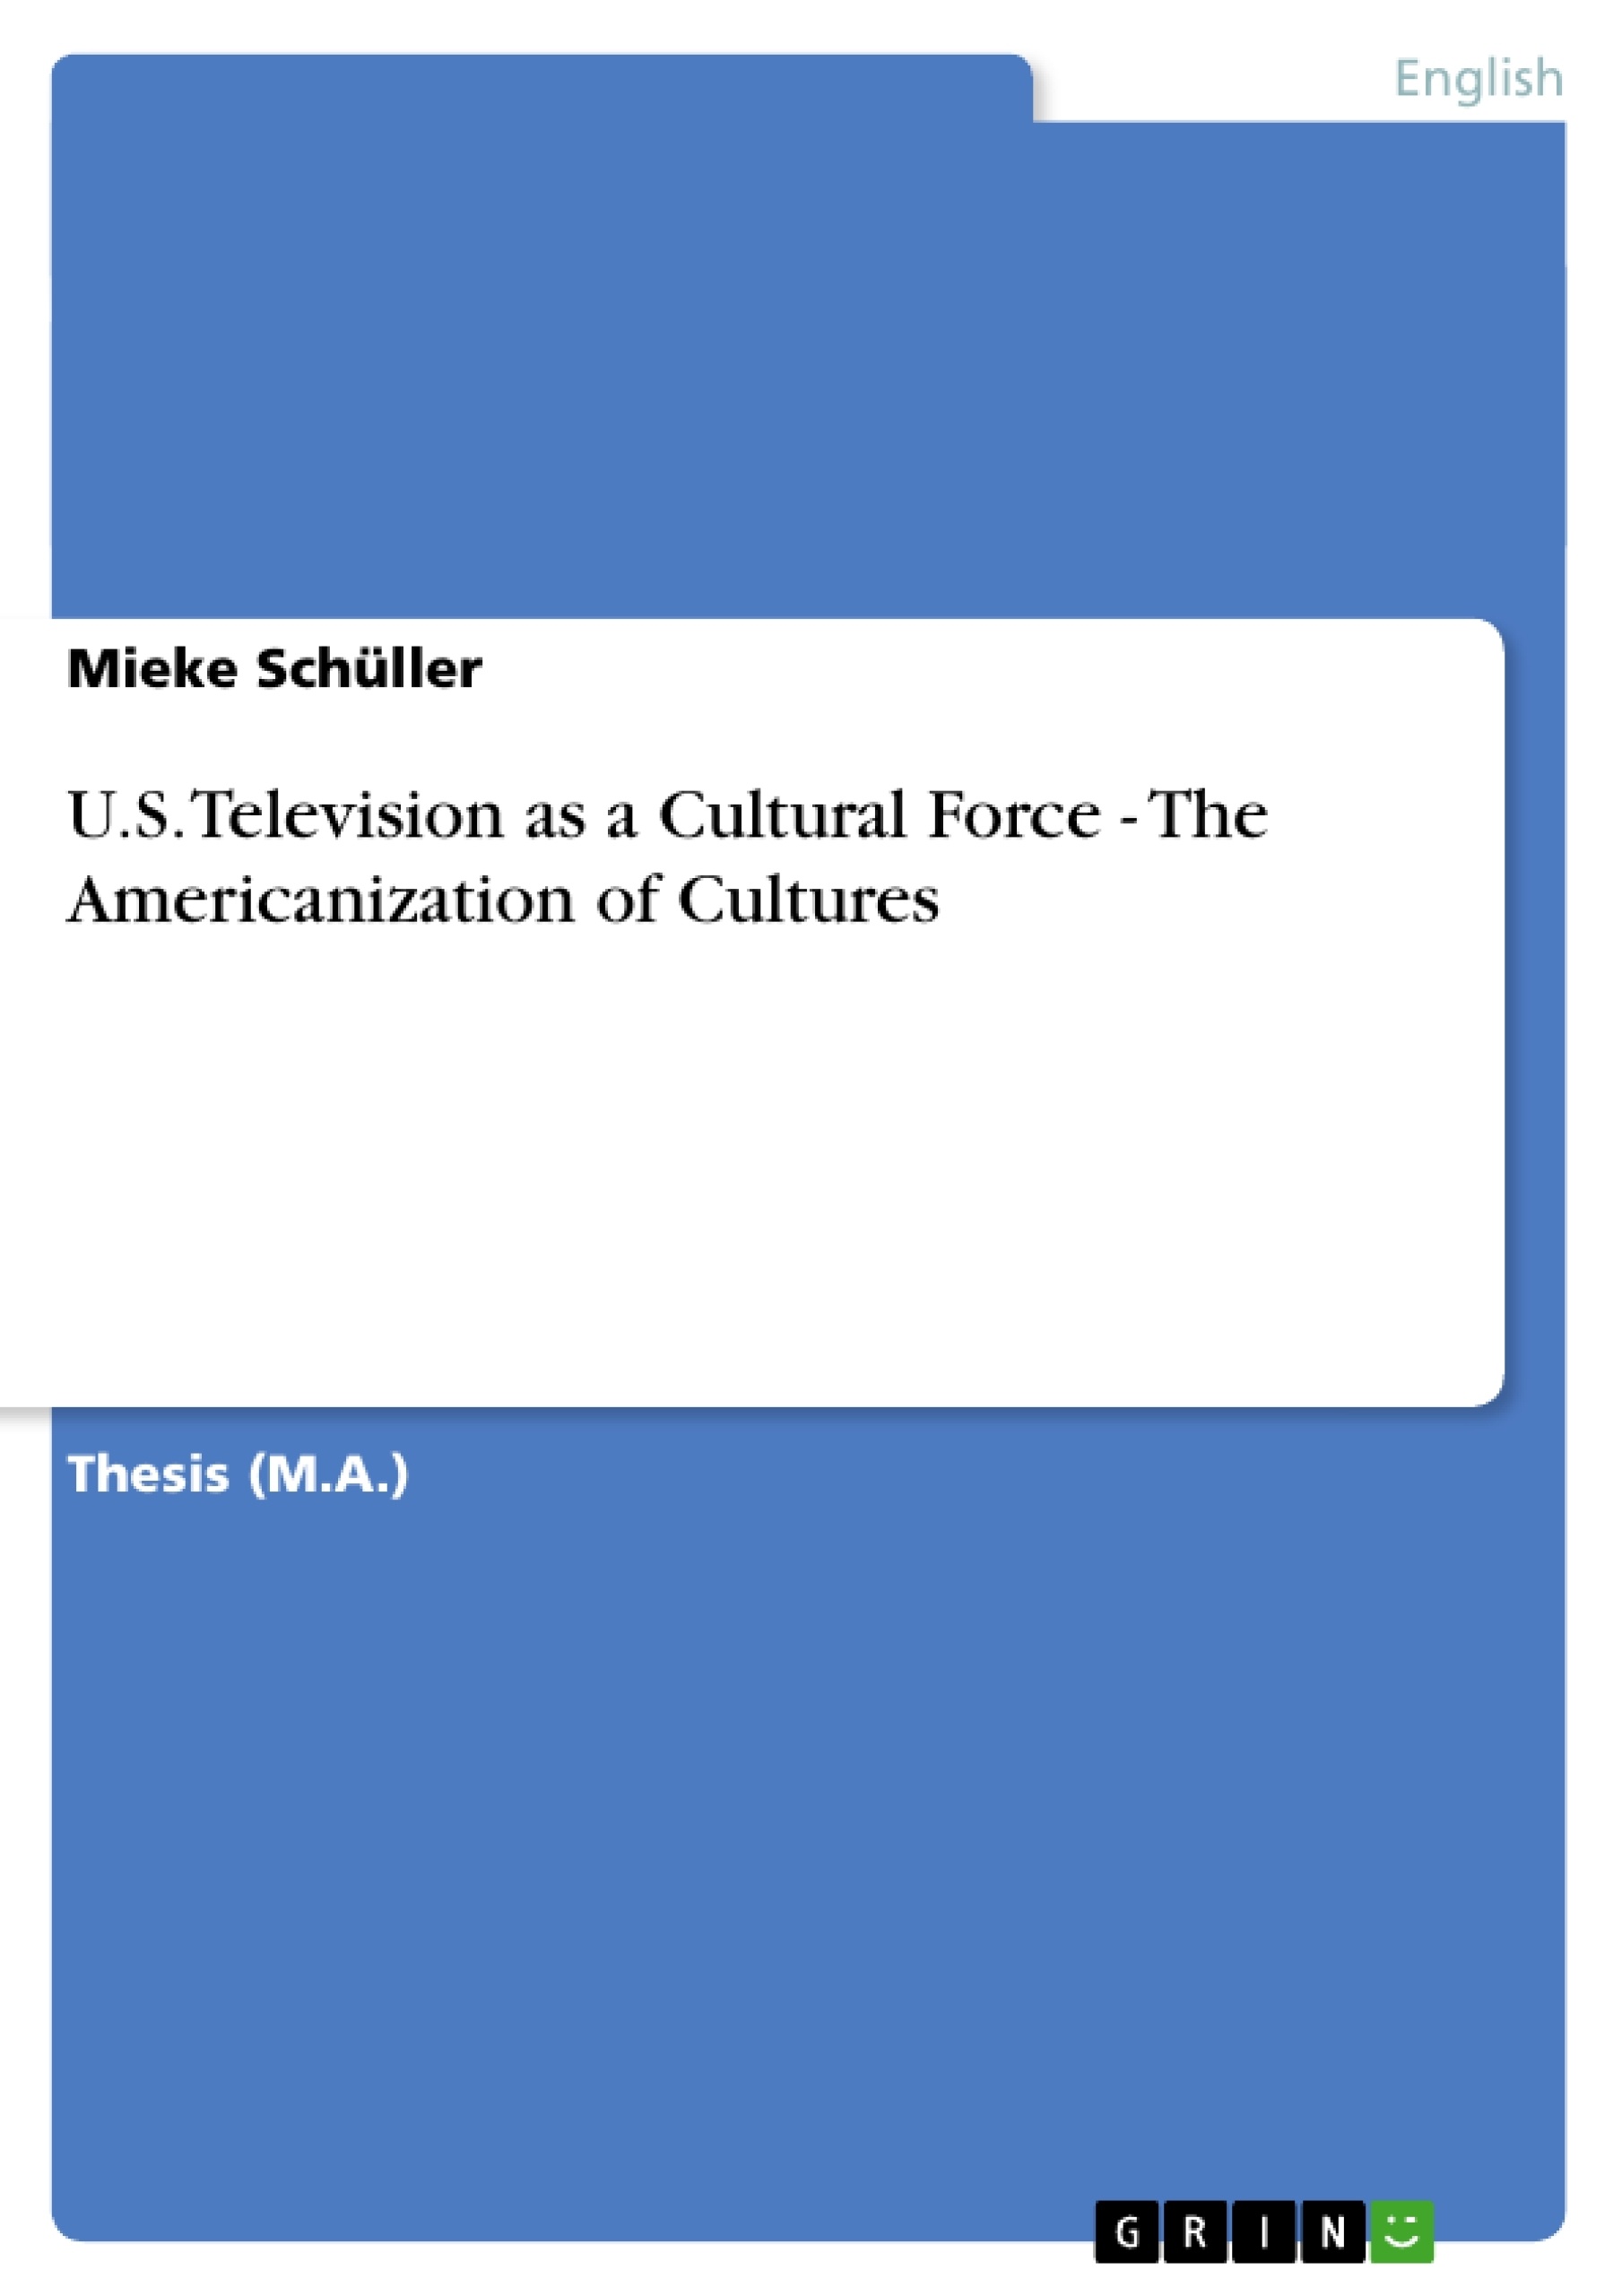 Title: U.S. Television as a Cultural Force - The Americanization of Cultures